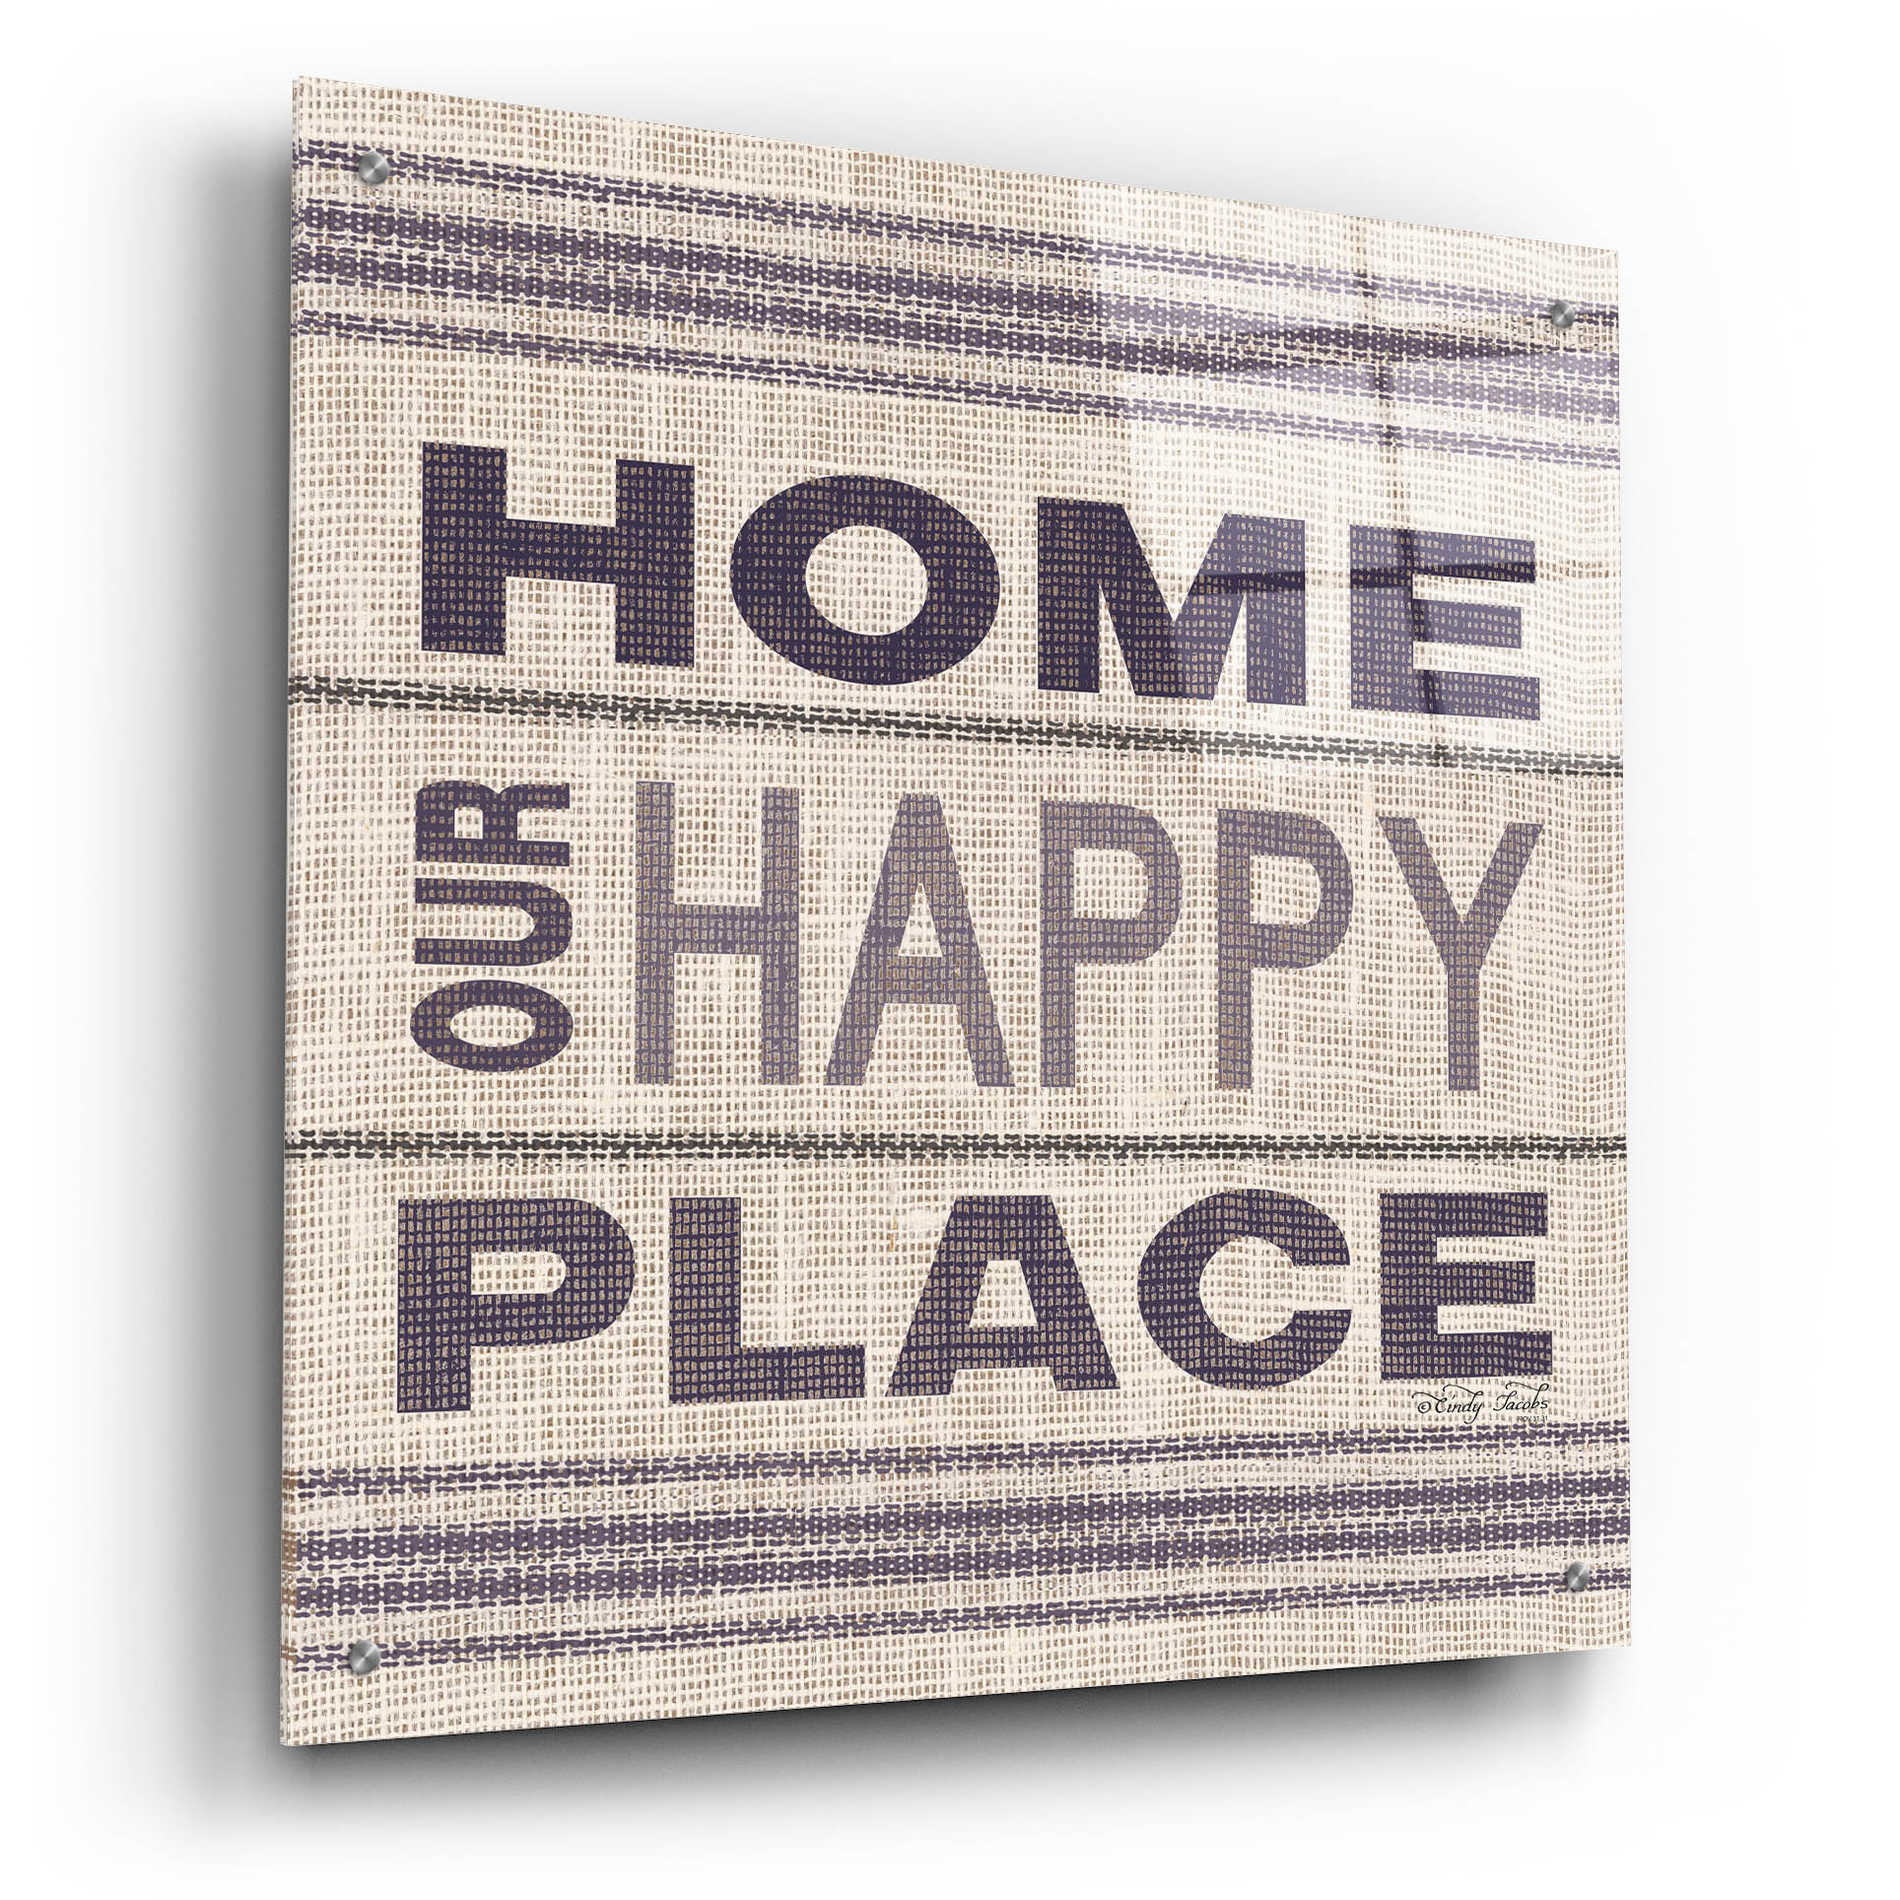 Epic Art 'Home - Our Happy Place' by Cindy Jacobs, Acrylic Glass Wall Art,24x24